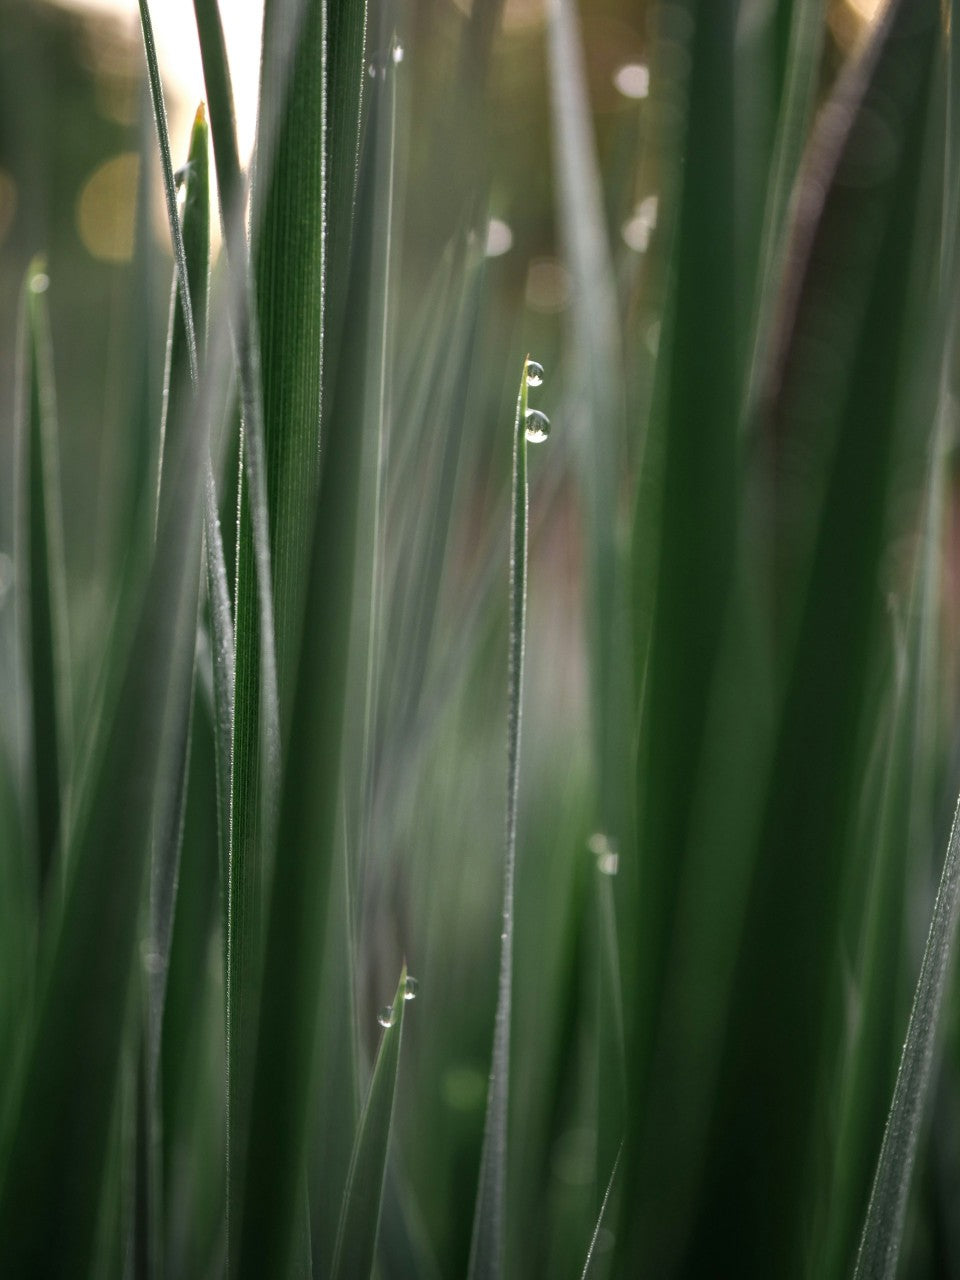 New blades of green grass with water drops